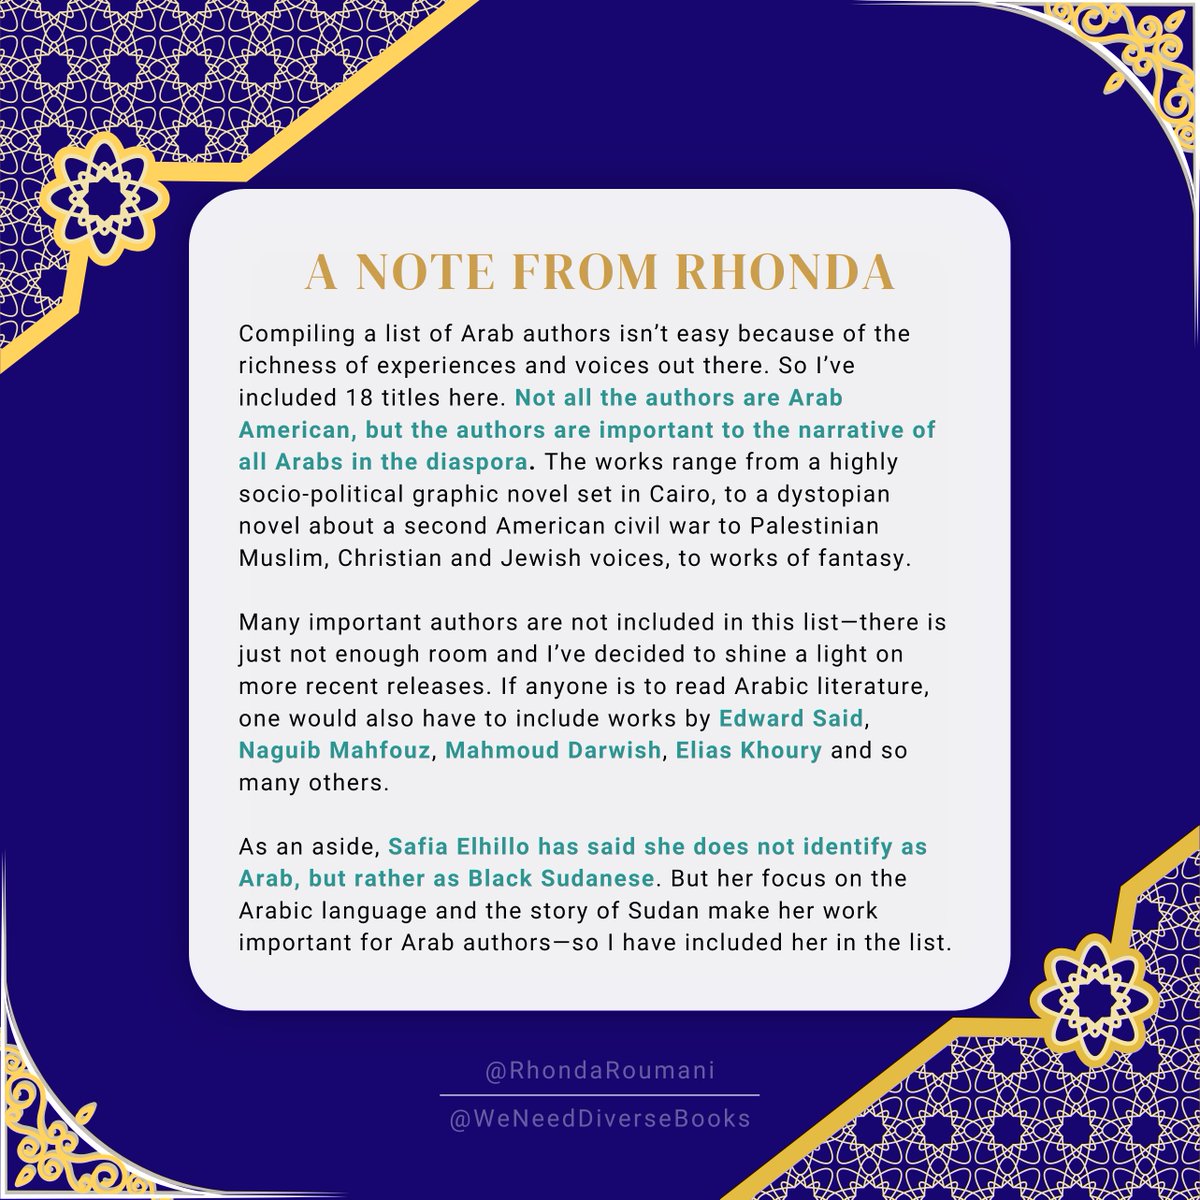 Thank you to Syrian American journalist and kidlit author, Rhonda Roumani, for compiling this list of 18 Adult Books for Arab American Heritage Month! If you're looking for more adult books that share Arab culture, check out this 🧵 of Rhonda's recommendations!